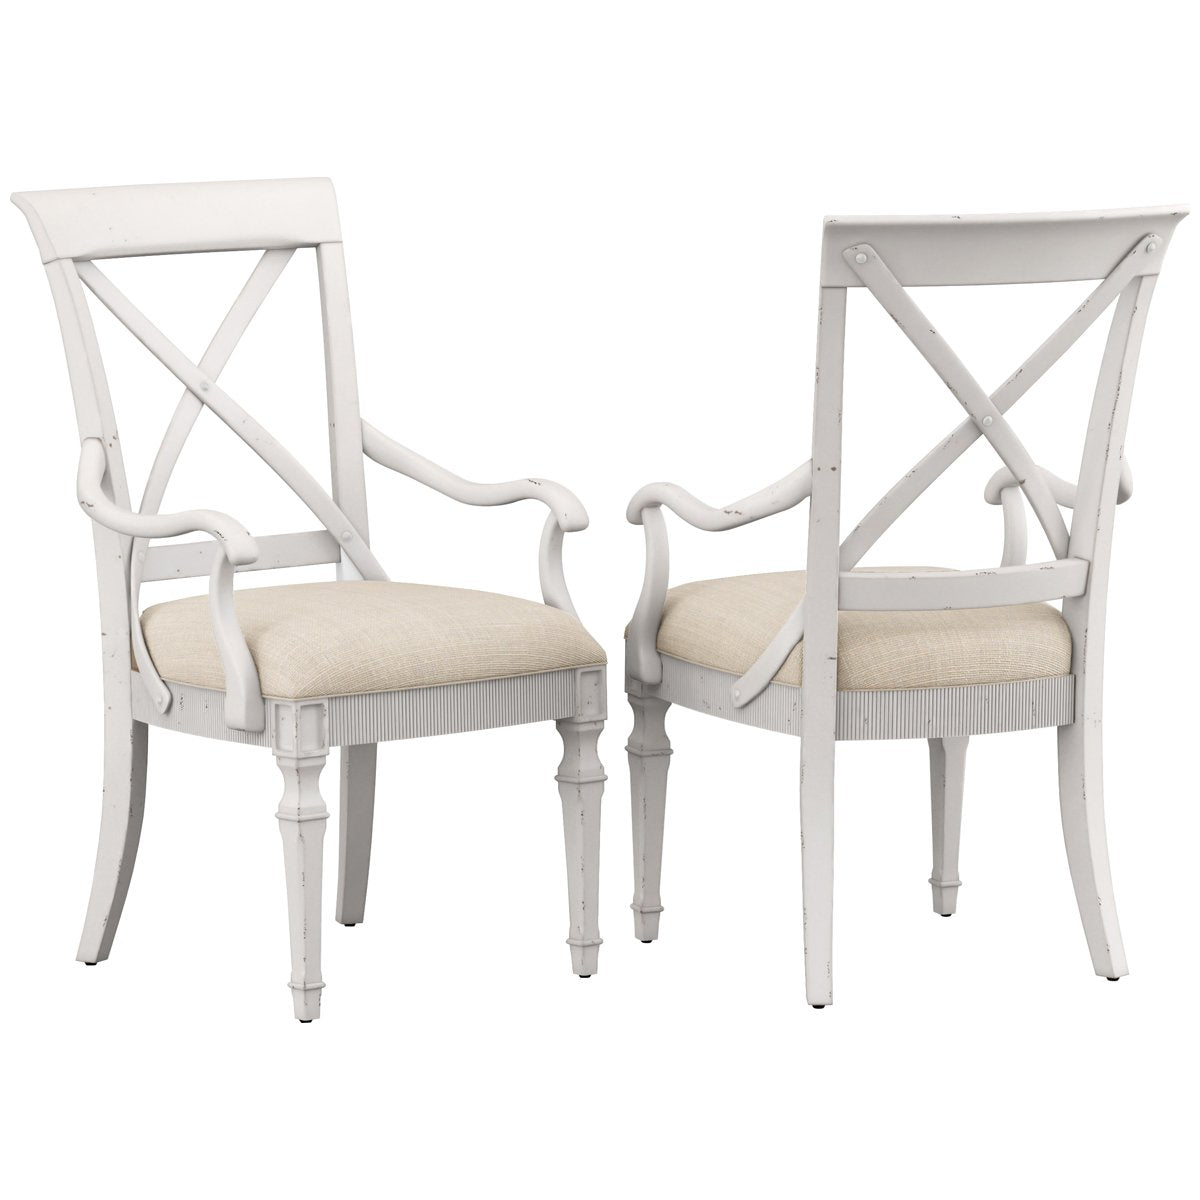 A.R.T. Furniture Palisade Arm Chair, Set of 2